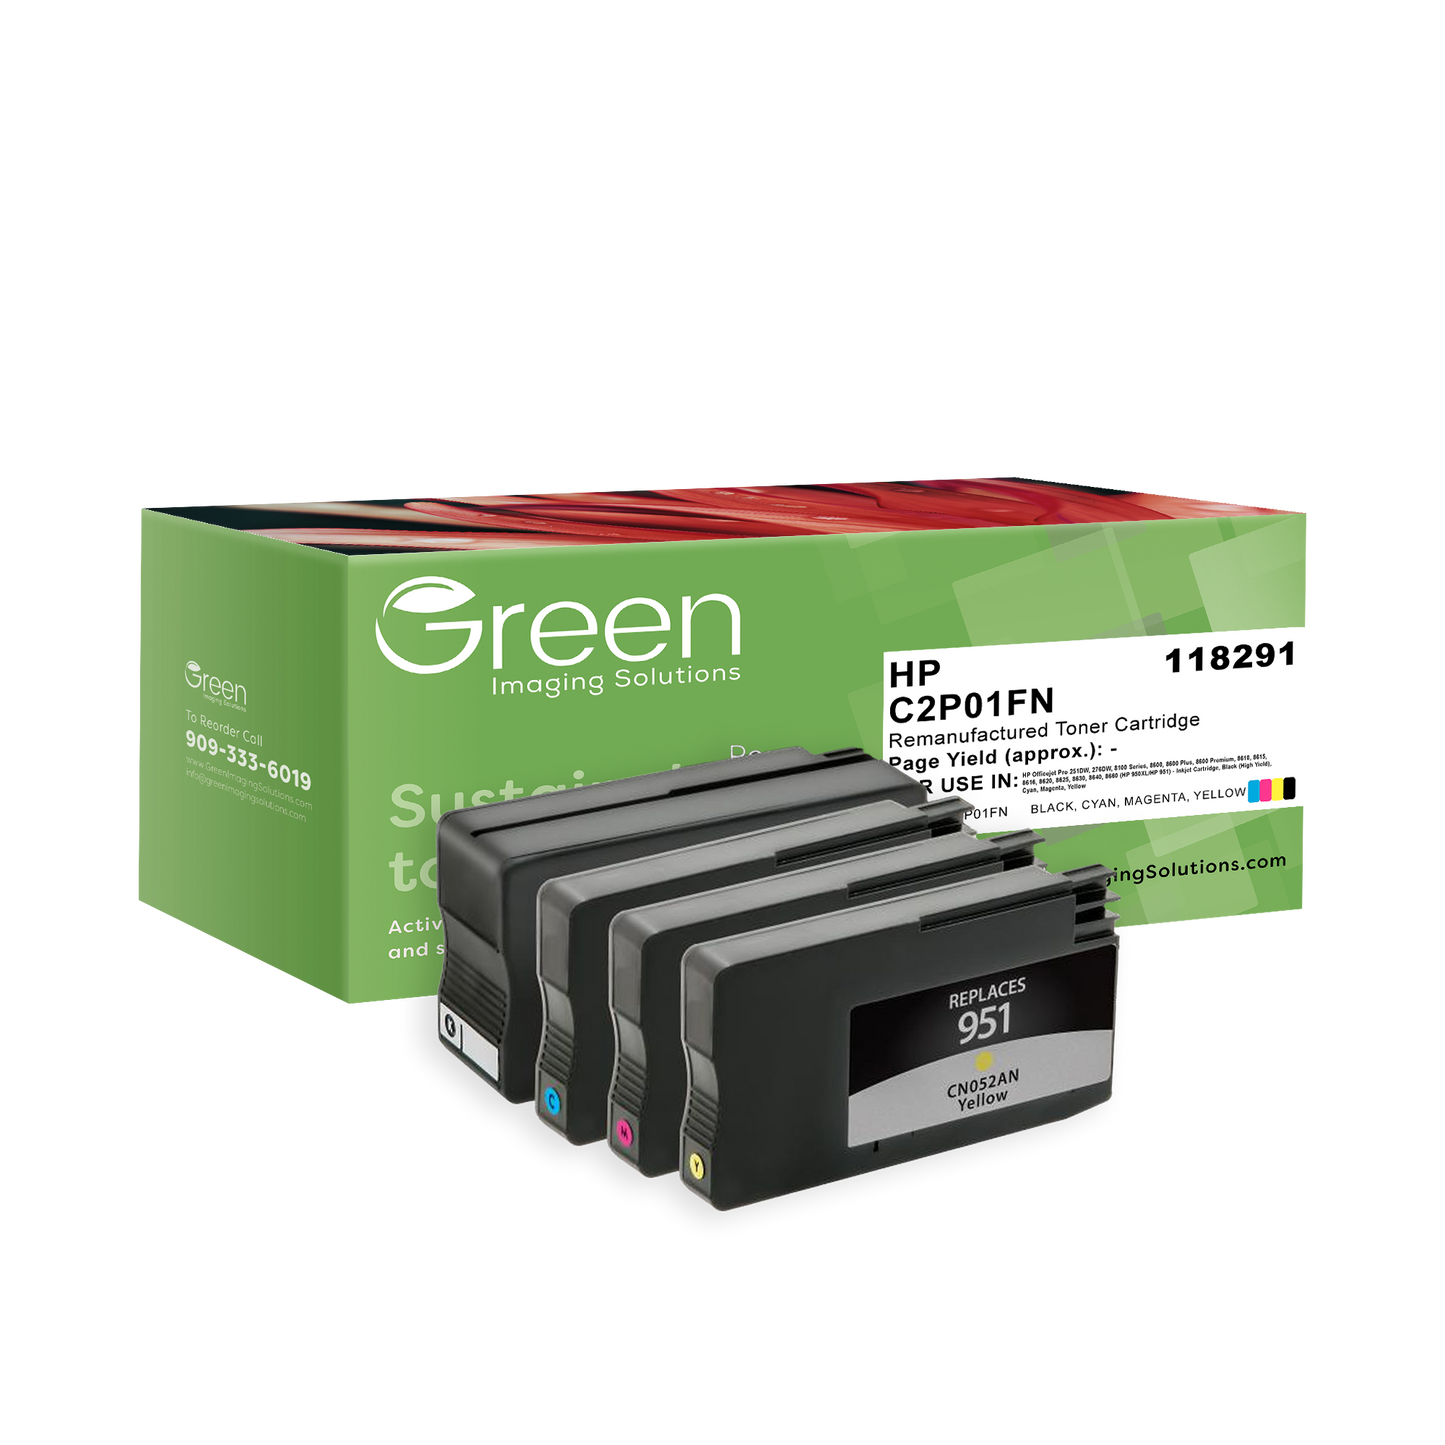 Green Imaging Solutions USA Remanufactured High Yield Black, Cyan, Magenta, Yellow Ink Cartridges for HP 950XL/951 (C2P01FN) 4-Pack